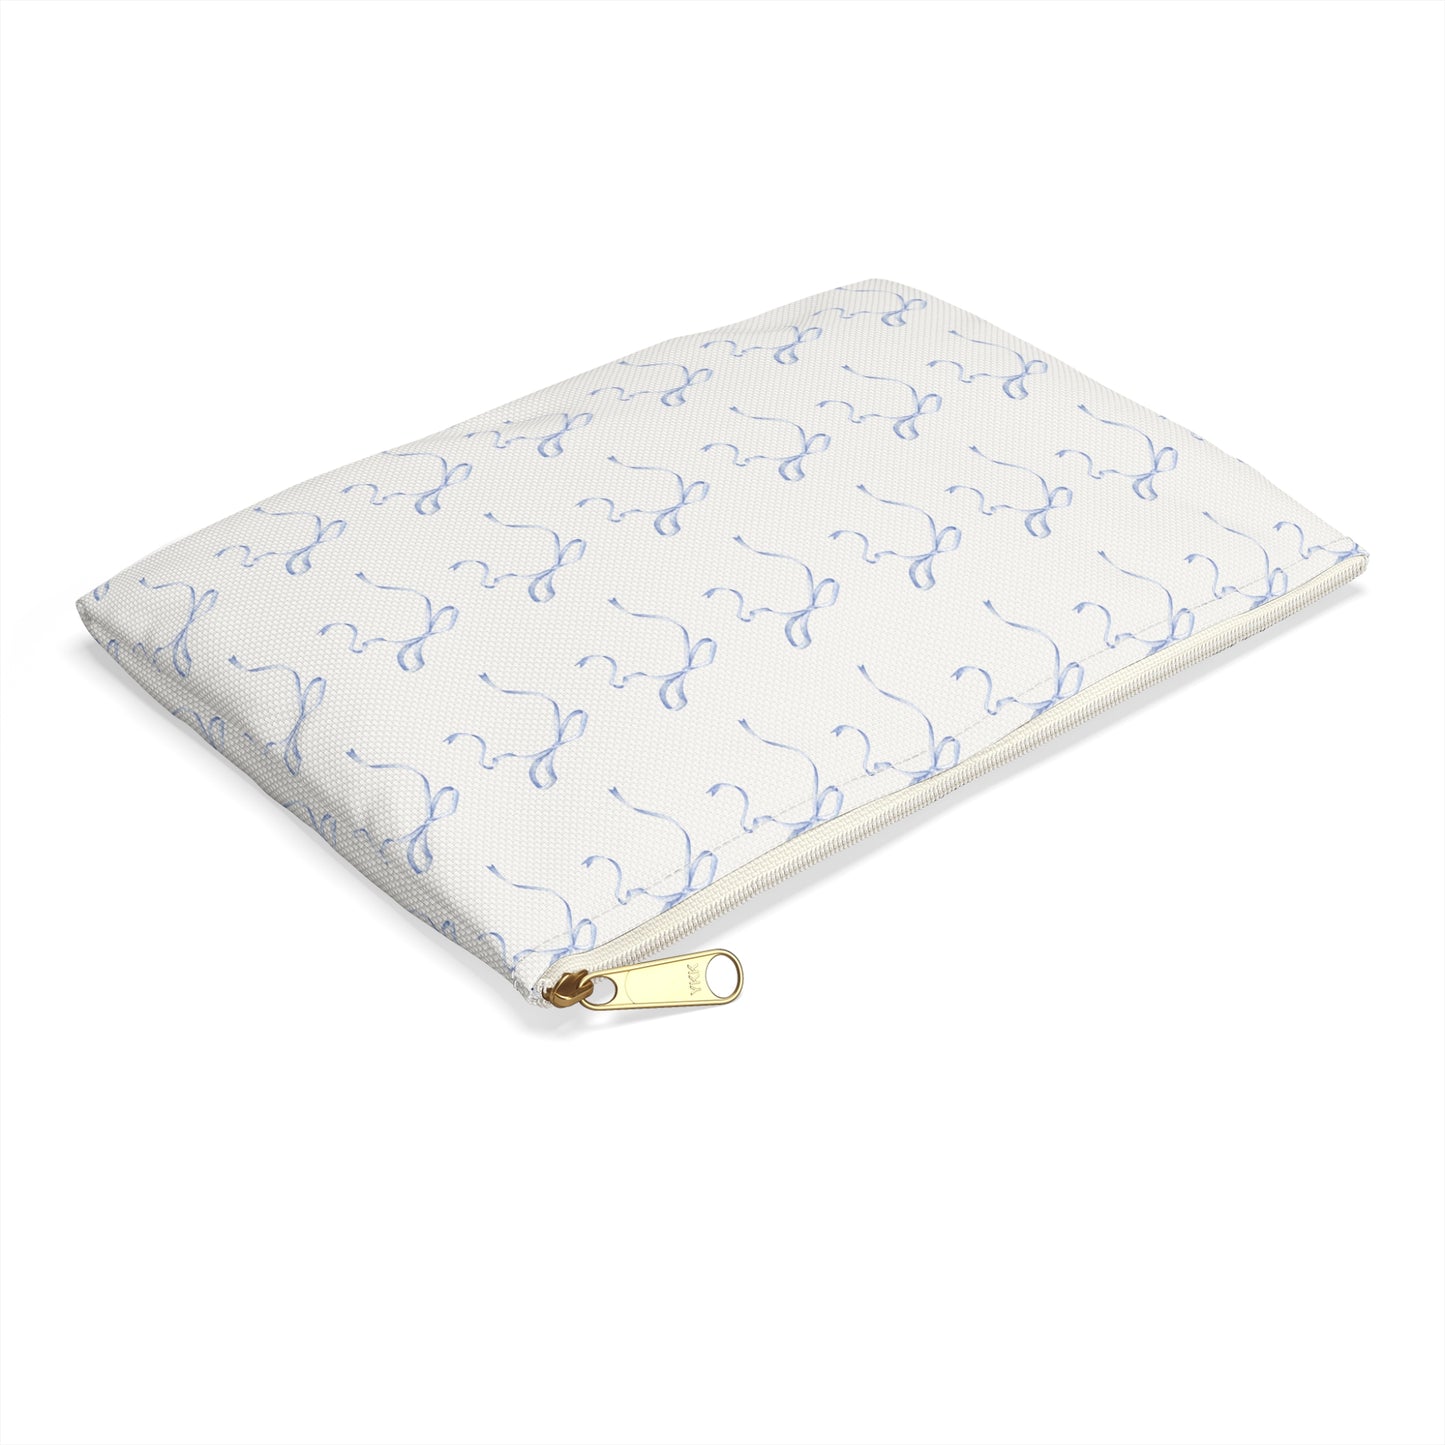 Multiple Thin Blue Bows on Beige Accessory Pouch